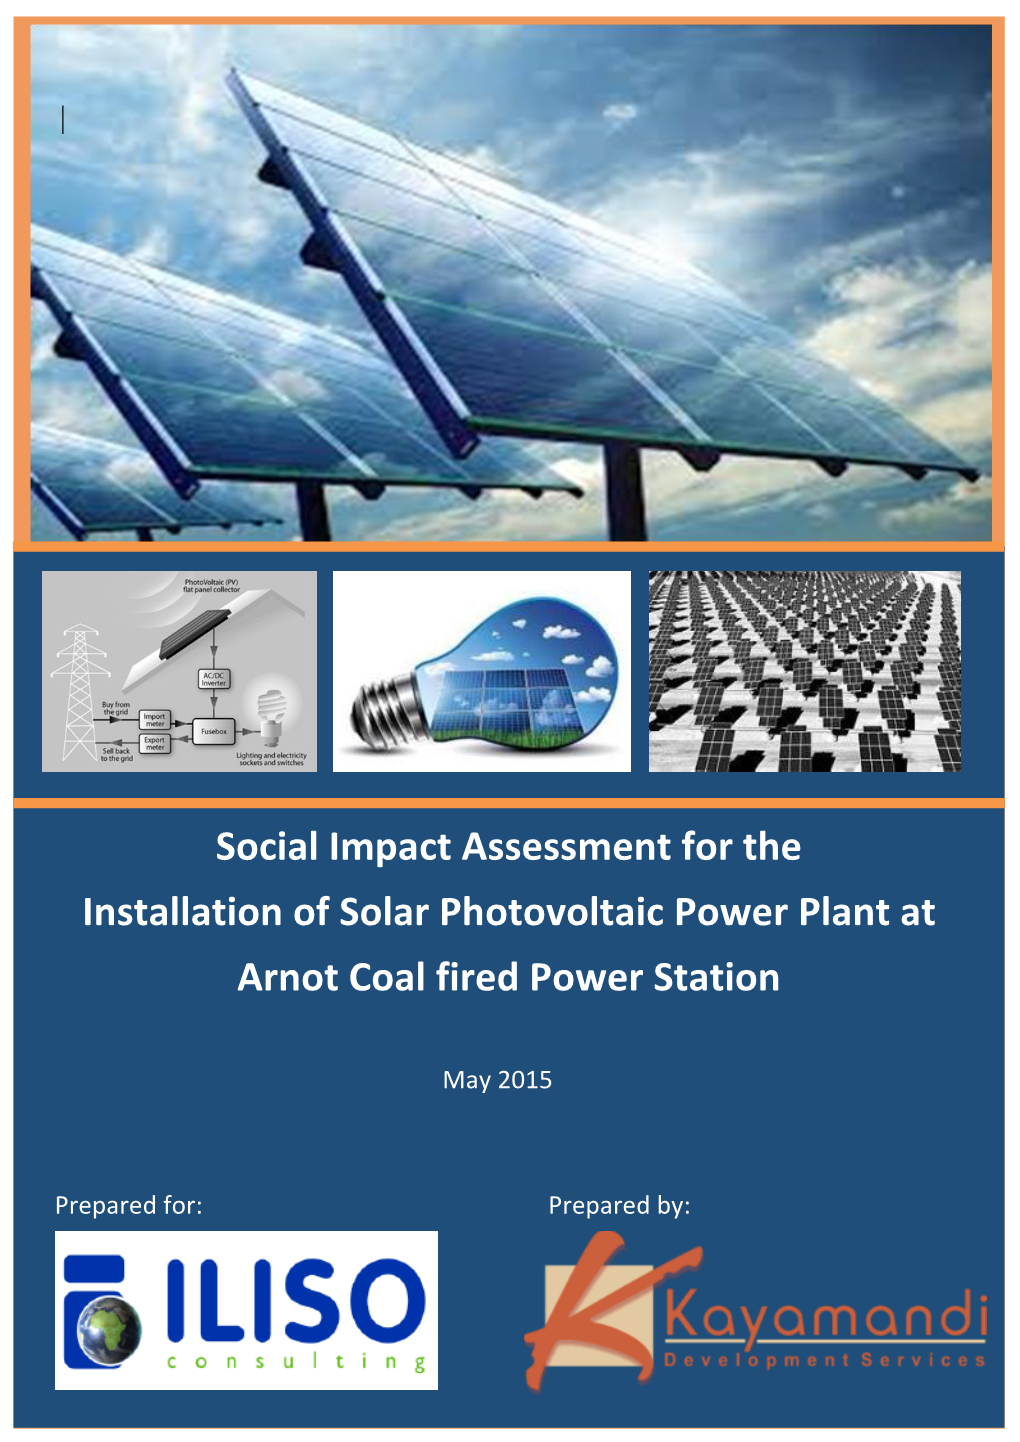 Social Impact Assessment: Installation of Solar Photovoltaic Power Plant at Arnot Coal Fired Power Station